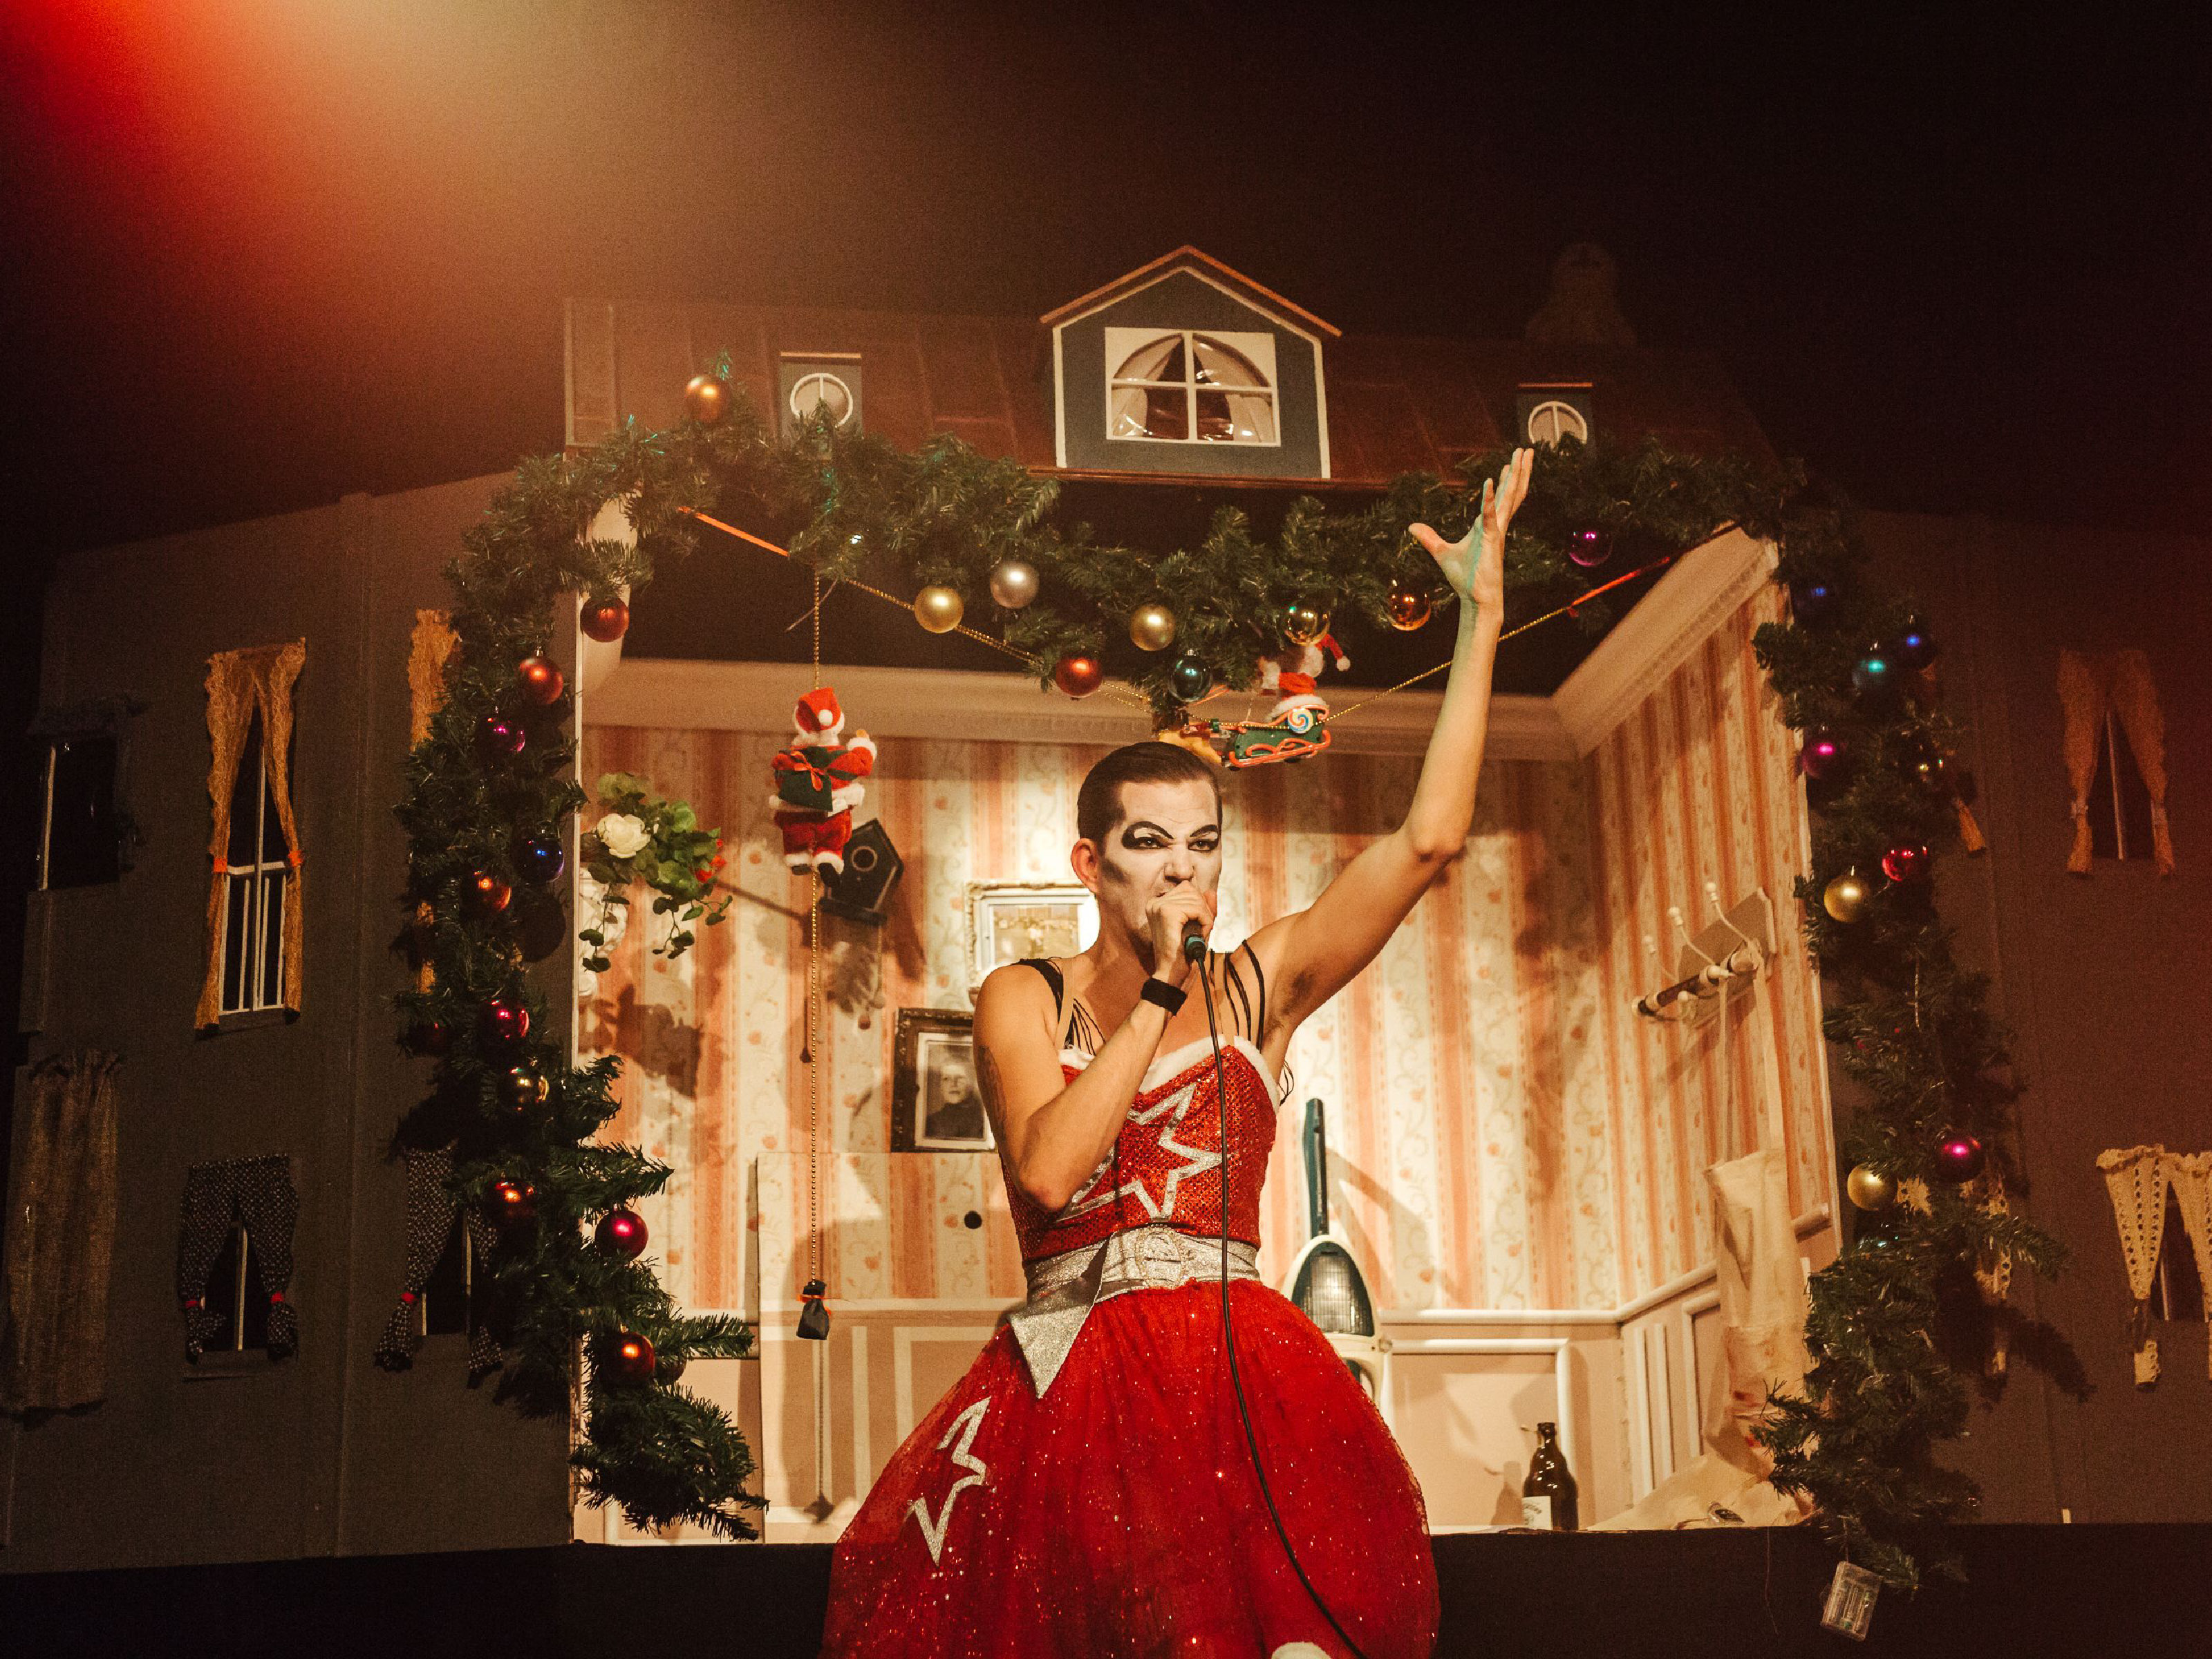 Performer Jarnoth stands in red party dress with glitter star and drag make-up in front of a large dollhouse room with Christmas decorations and sings passionately in a microphone he holds in his left hand. His right arm is stretched far upwards.